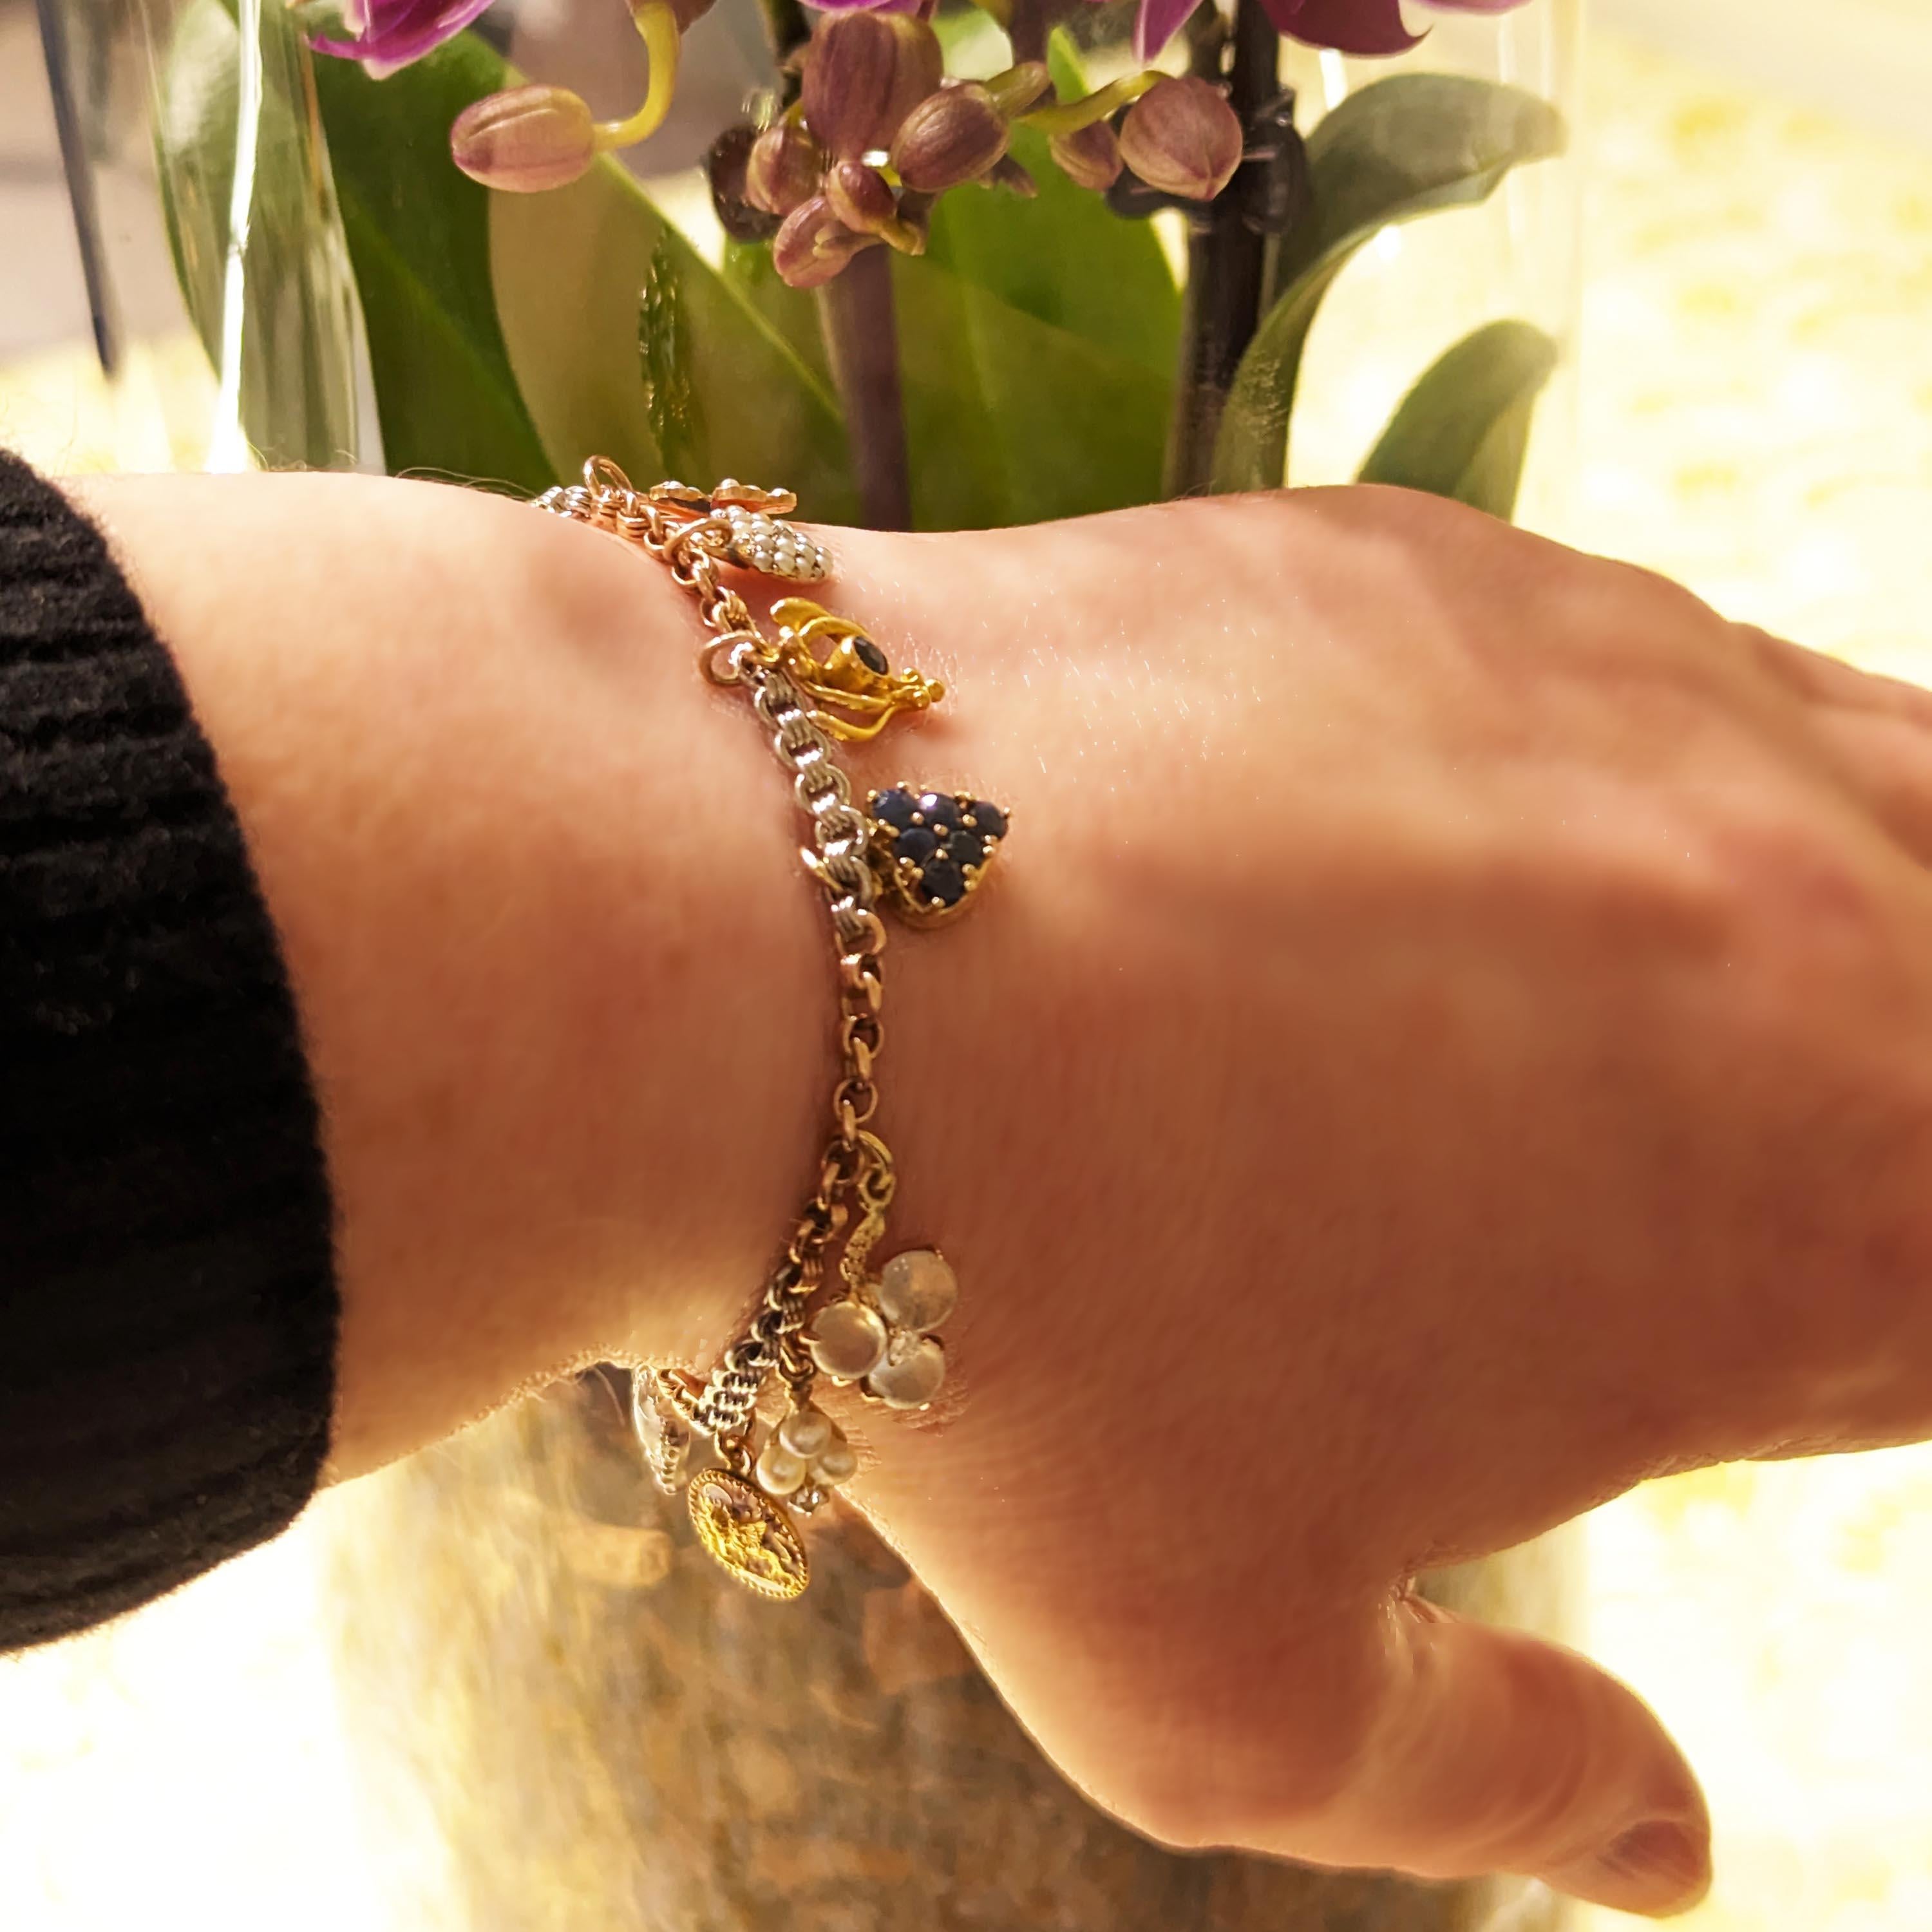 A vintage gemstone, enamel, gold and platinum charm bracelet, with charms from left to right featuring: a gold foliate design on a dark blue enamel background, in gold, with a hair locket in the back; a gold crown, with enamel depicting blue, green